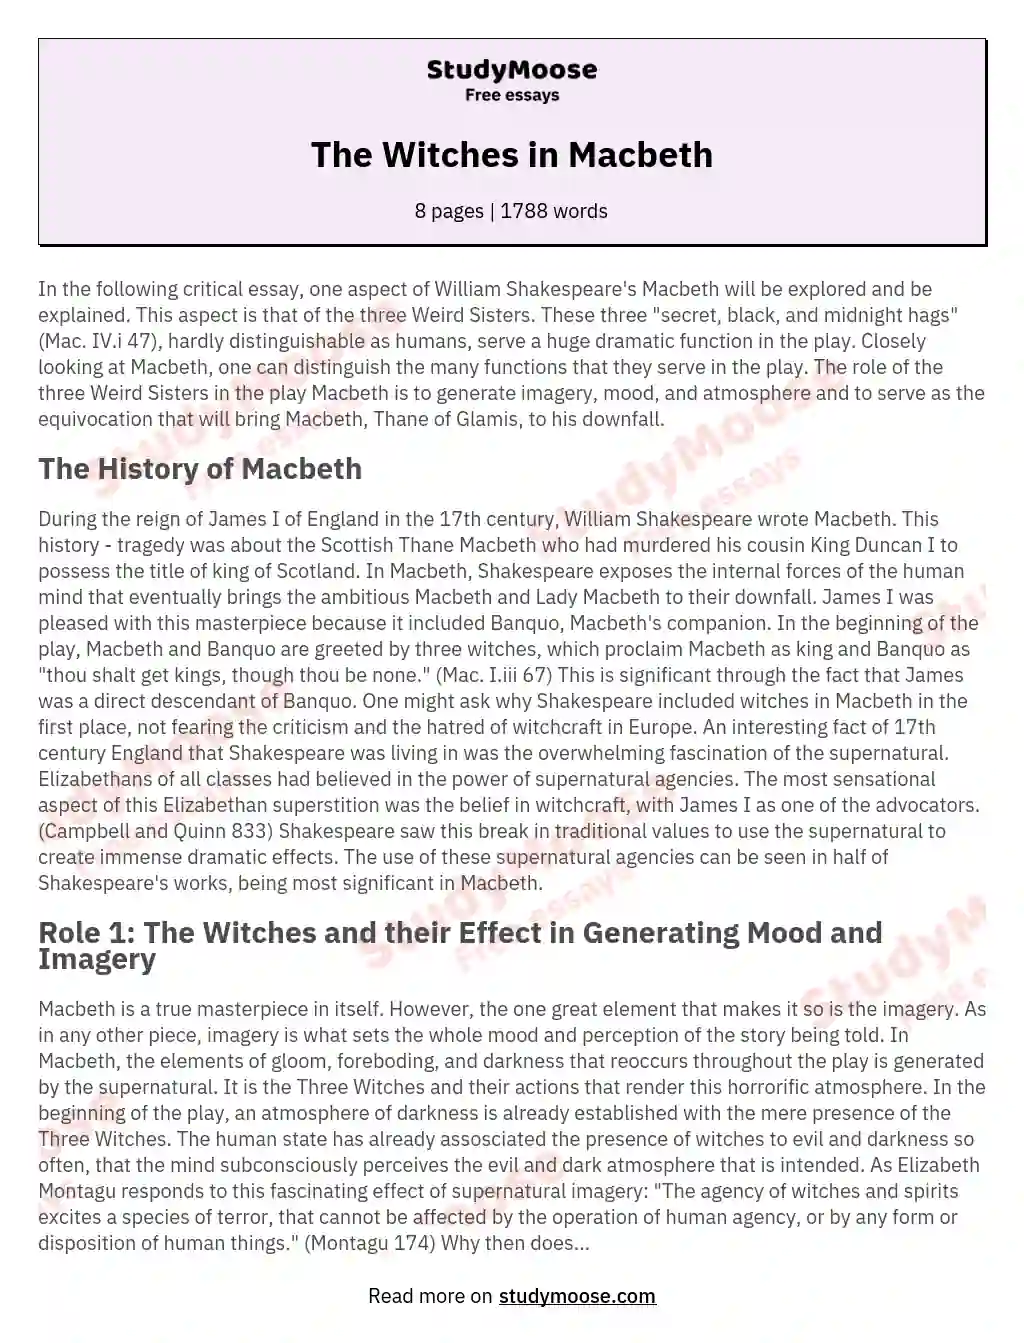 The Witches in Macbeth essay